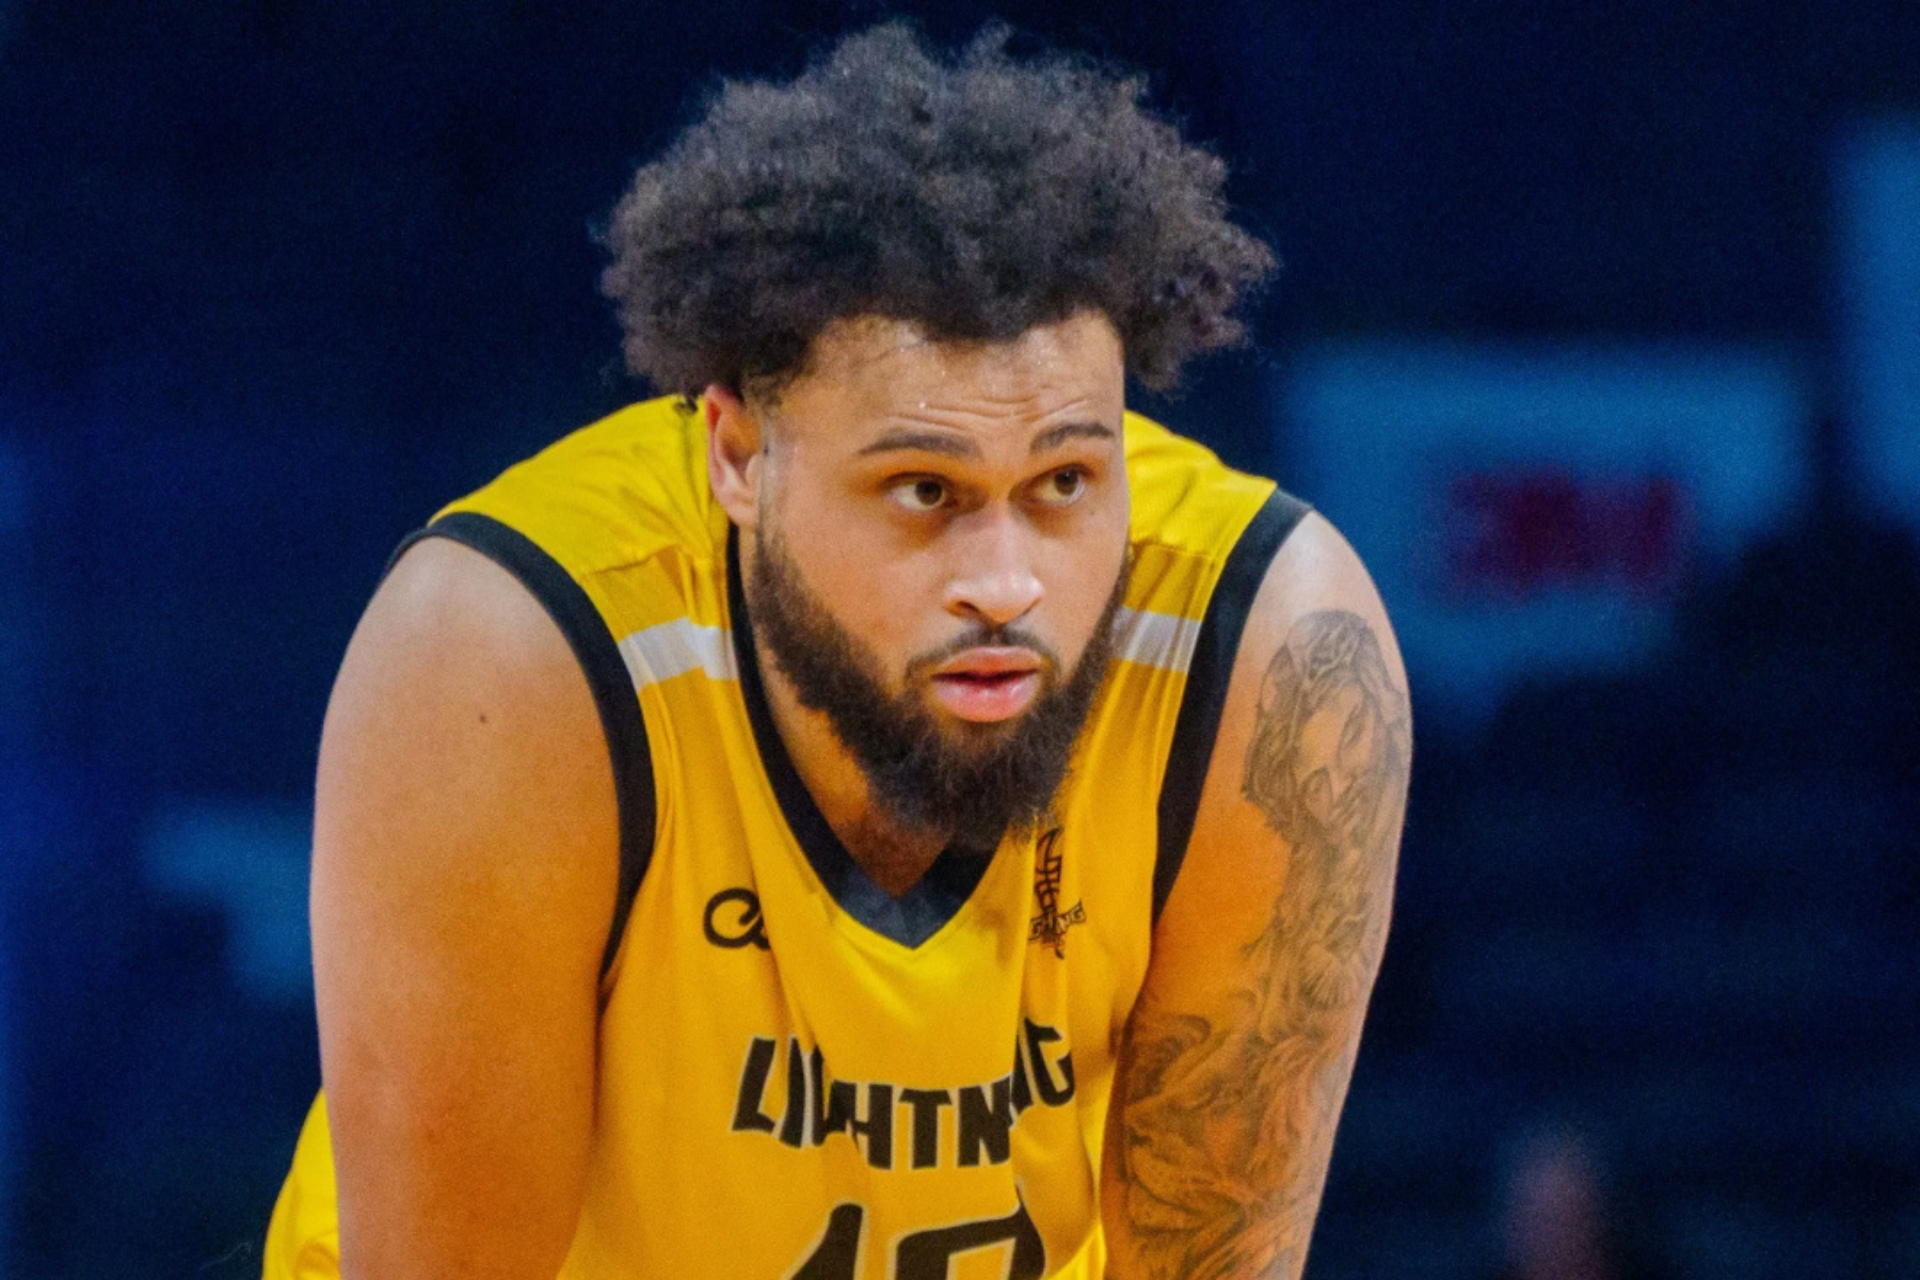 London Lightning Falls to St. Louis Griffins in Heartbreaking Finish